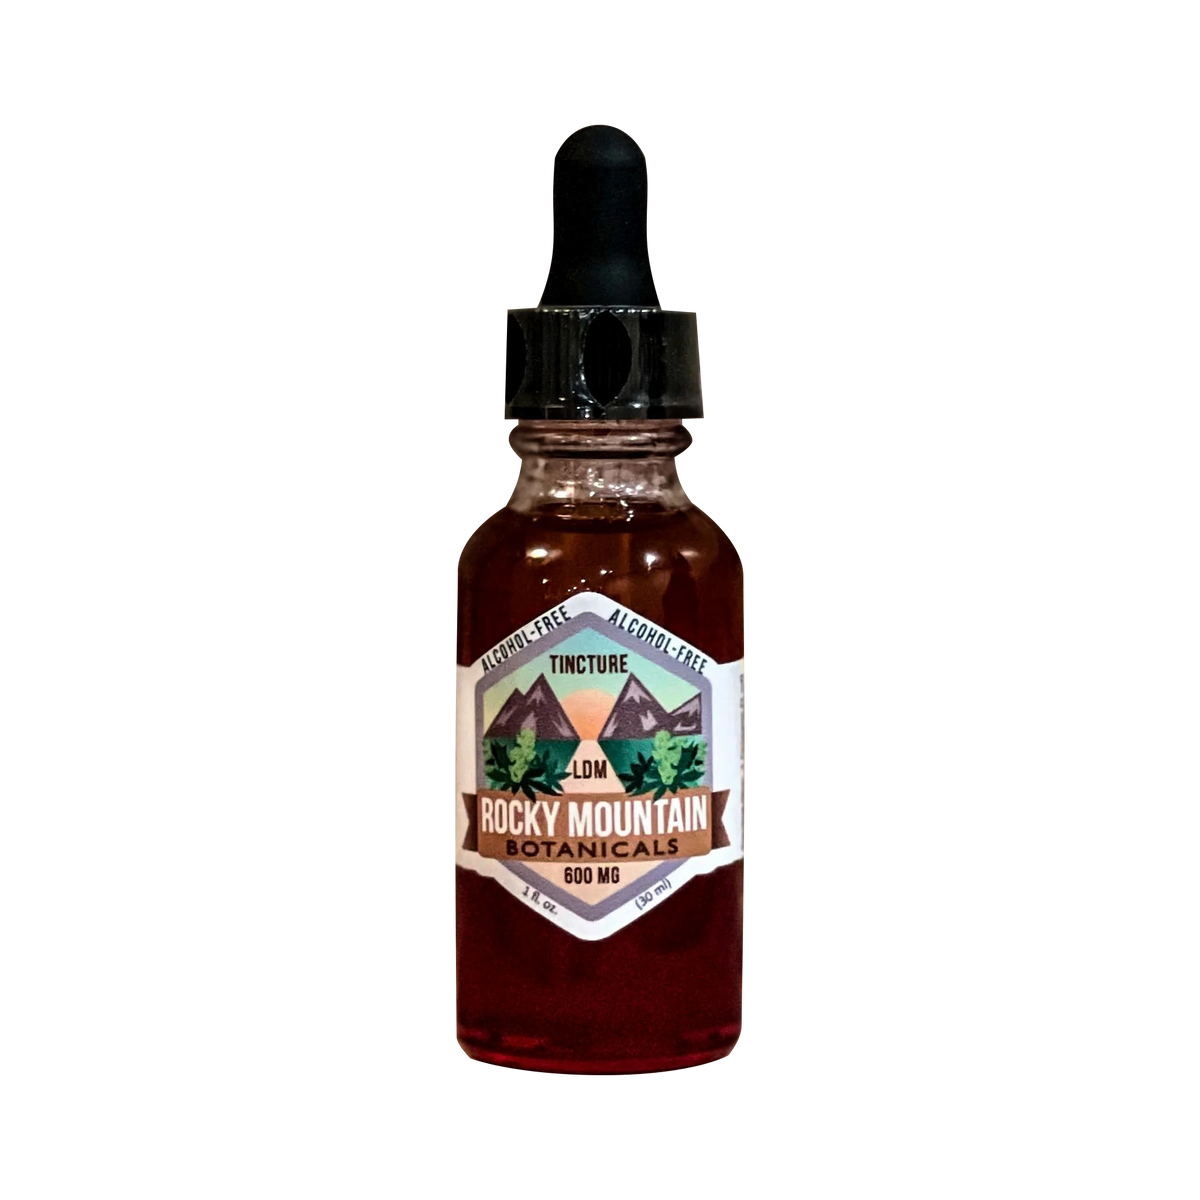 This Rocky Mountain LDM, 600mg (Lomatium Dissectum) is 100% alcohol-free, delivered in a MCT (coconut) oil, and produced from a wildcrafted root of the parsley family harvested in the northwestern United States. 